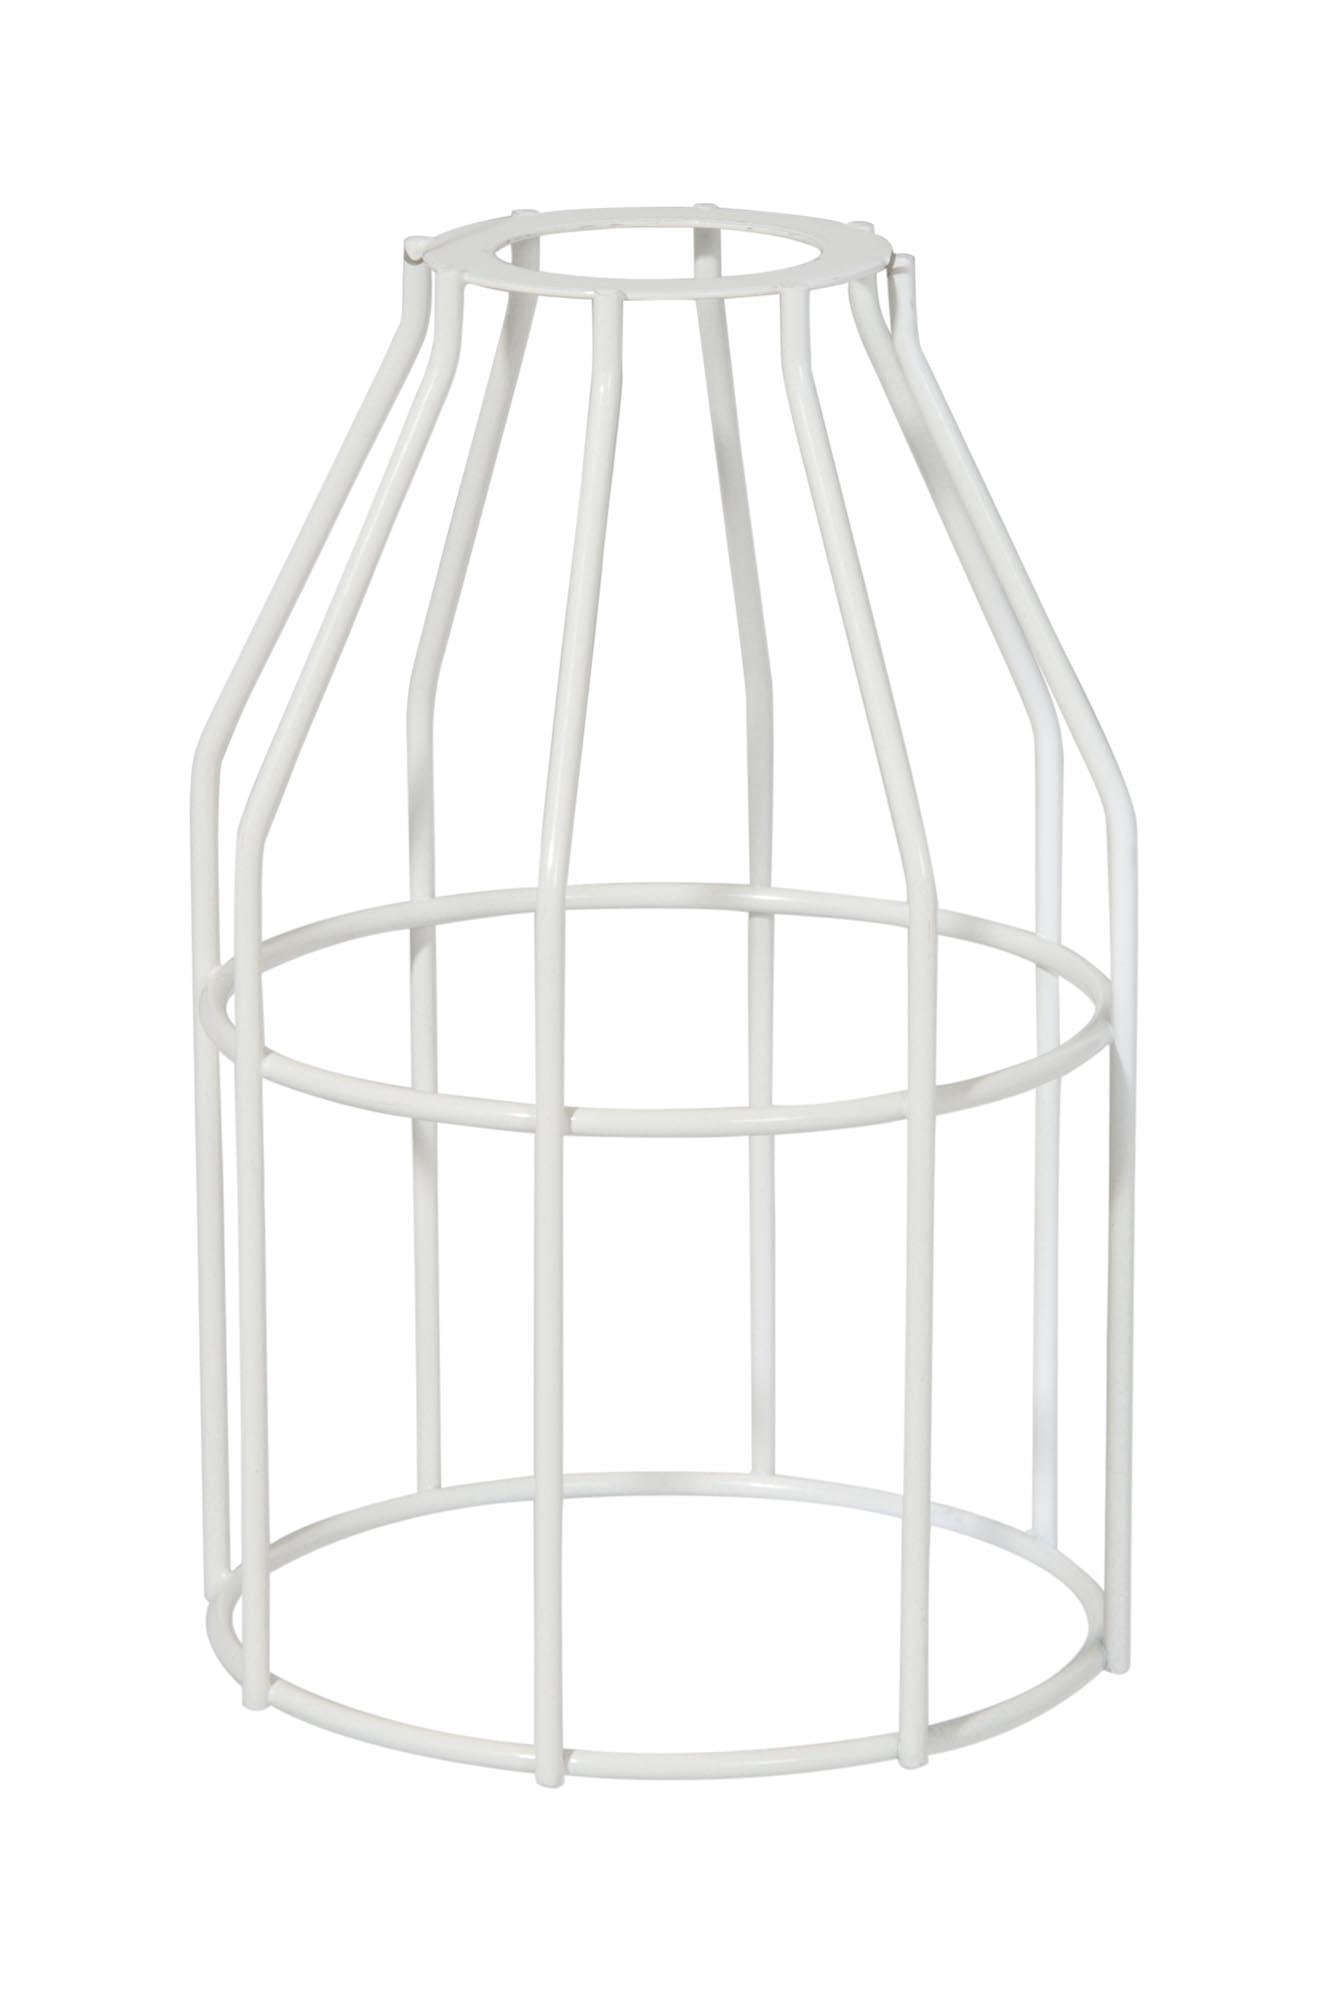 Glossy White Finish Steel Wire Bulb Cage, Slip On Washer Type